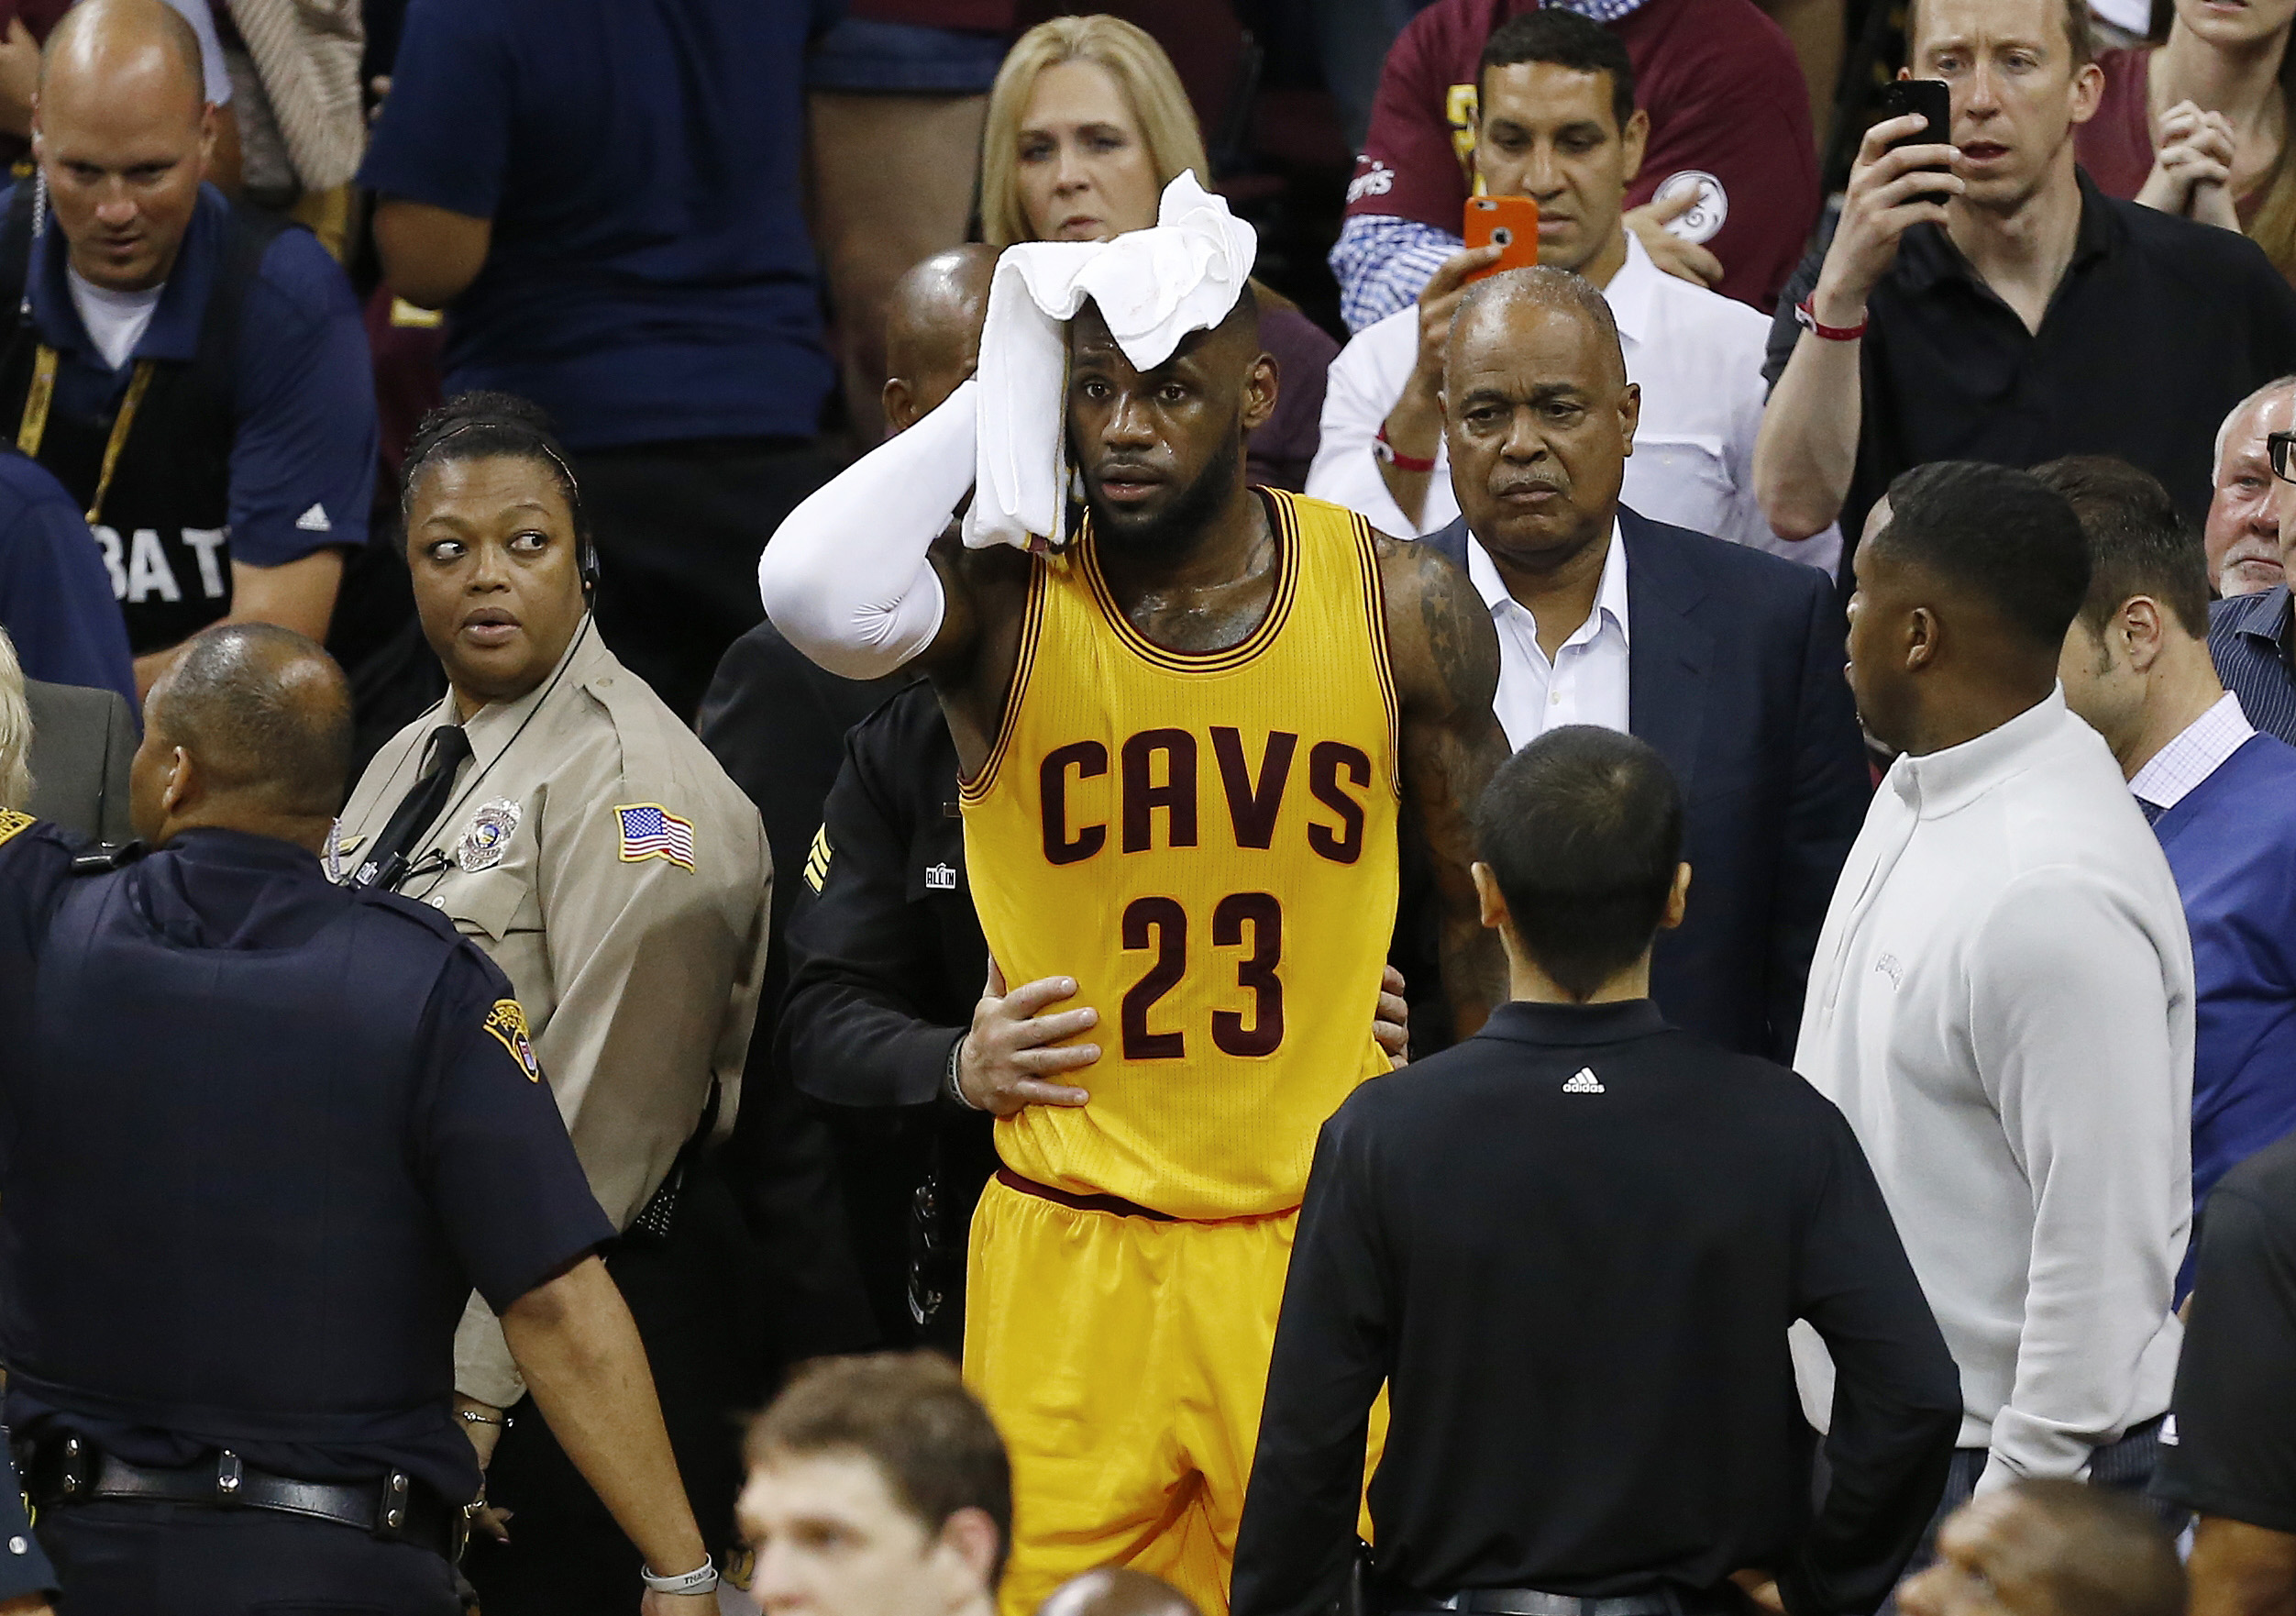 Cleveland Cavaliers forward LeBron James (23) holds a towel to his head after being knocked into the fans during the first half of Game 4 of basketball's NBA Finals against the Golden State Warriors in Cleveland, Thursday, June 11, 2015.